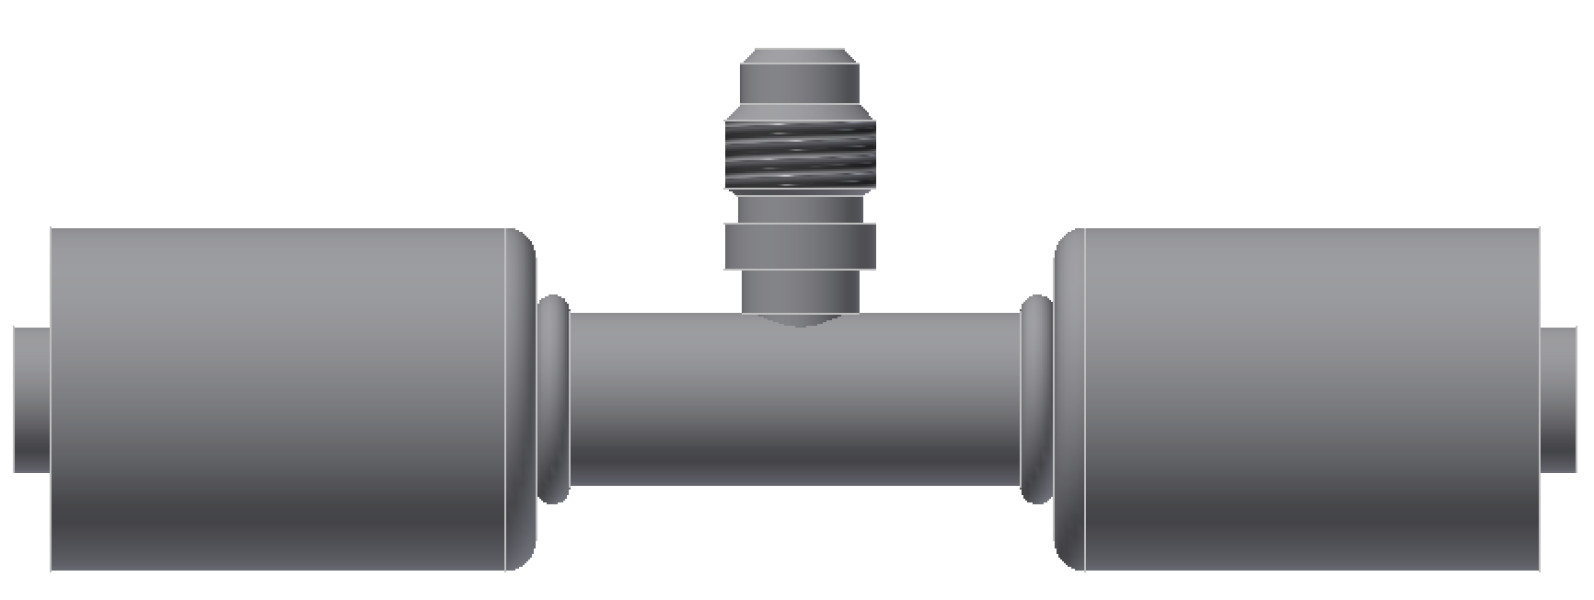 Image of A/C Refrigerant Hose Fitting from Sunair. Part number: SA-7020-08-08S